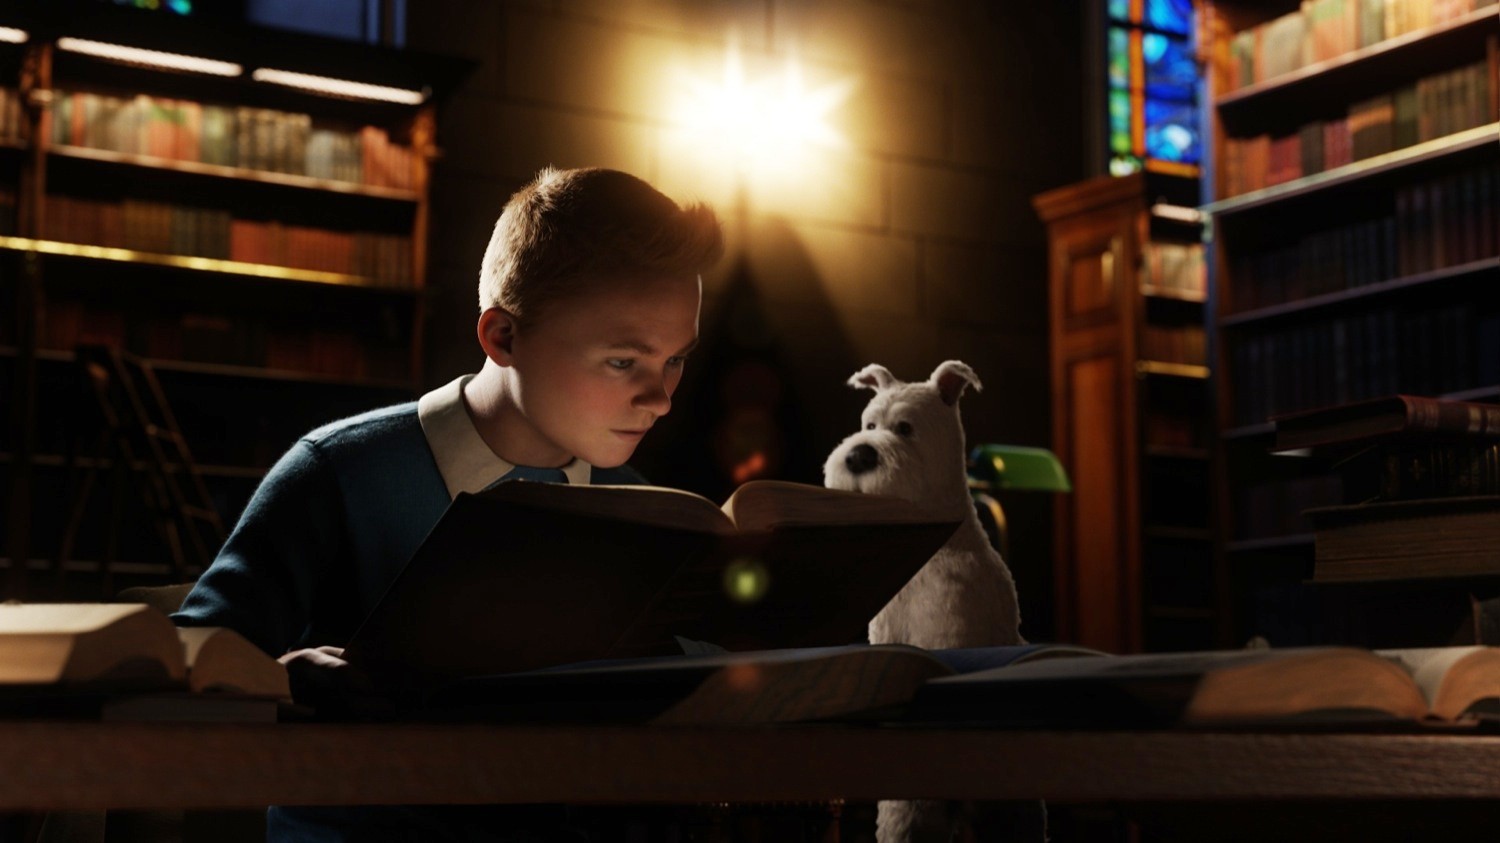 A scene from The Adventures of Tintin: The Secret of the Unicorn (2011)